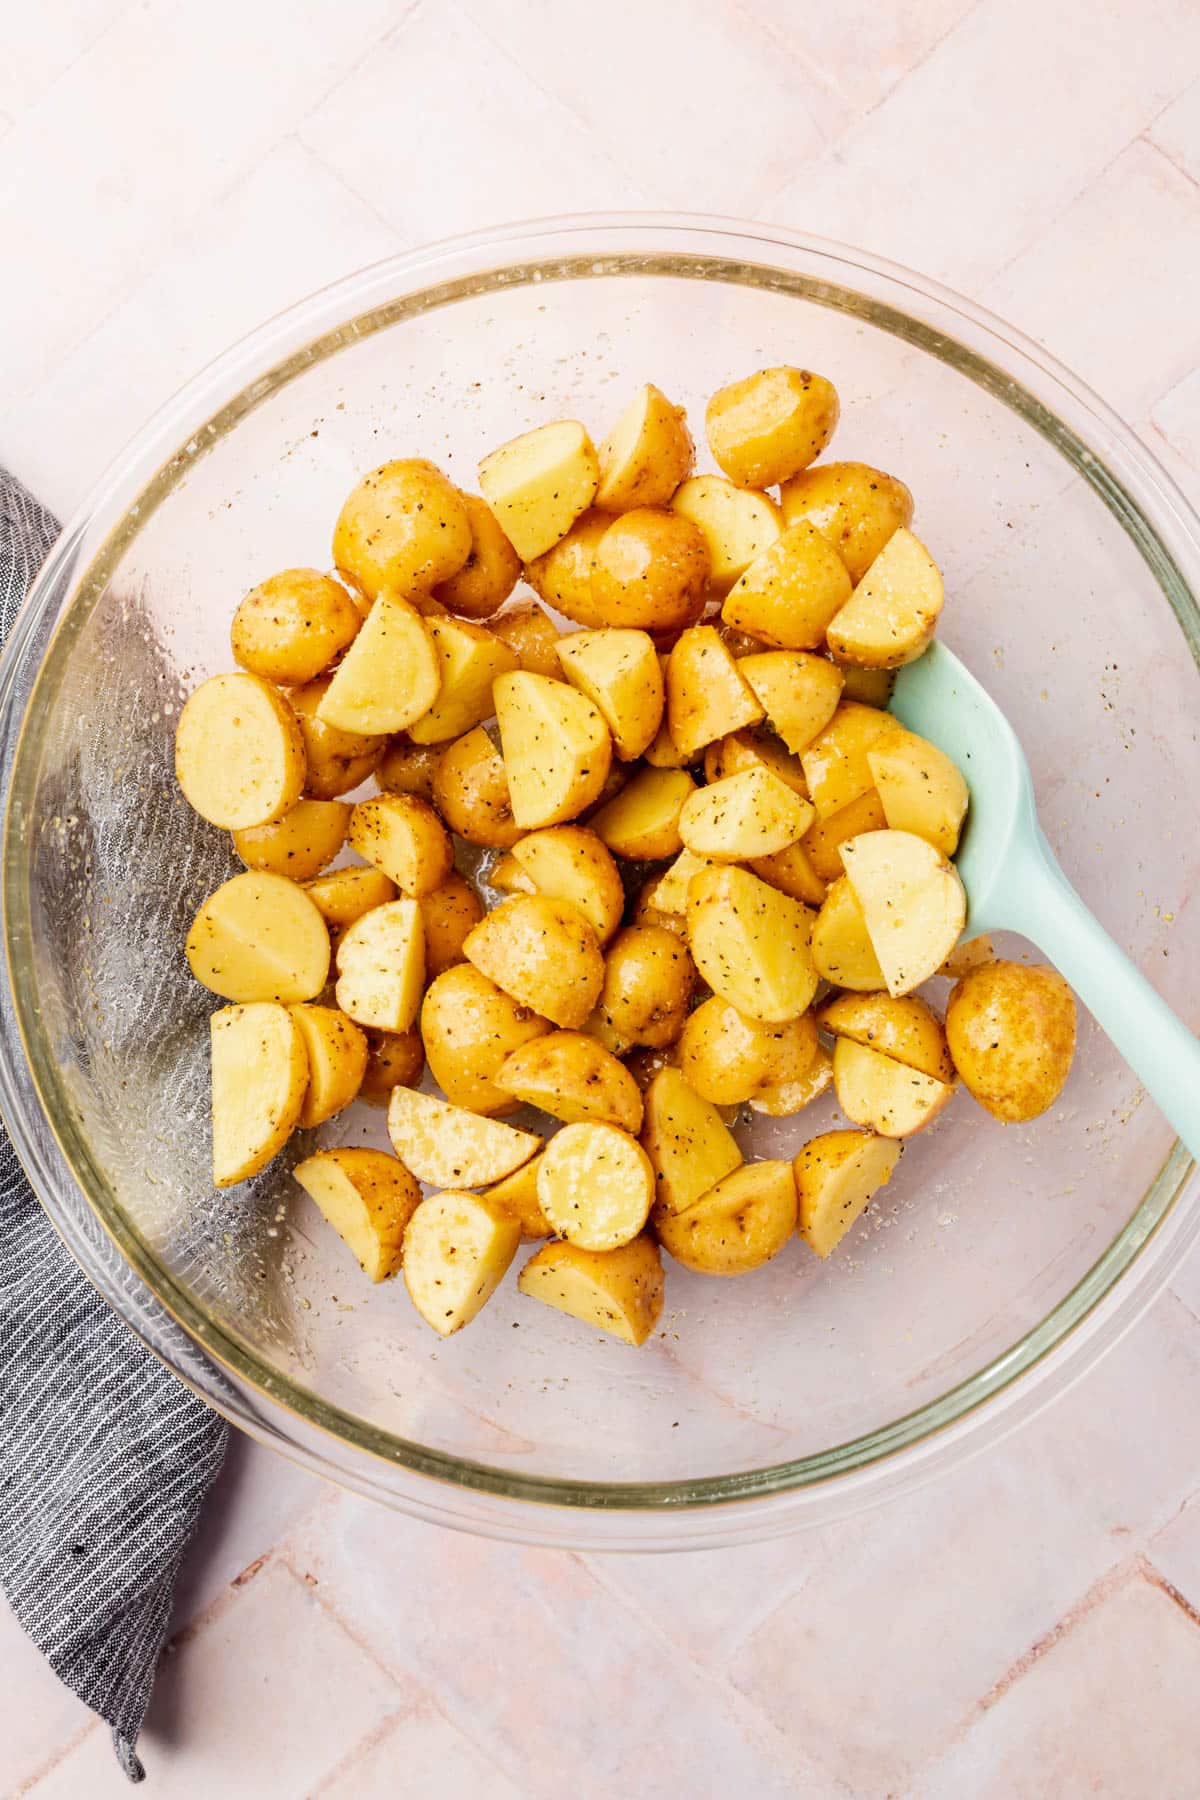 A glass mixing bowl of sliced baby yukon gold potatoes that have been mixed together with olive oil and spices with a blue spatula.